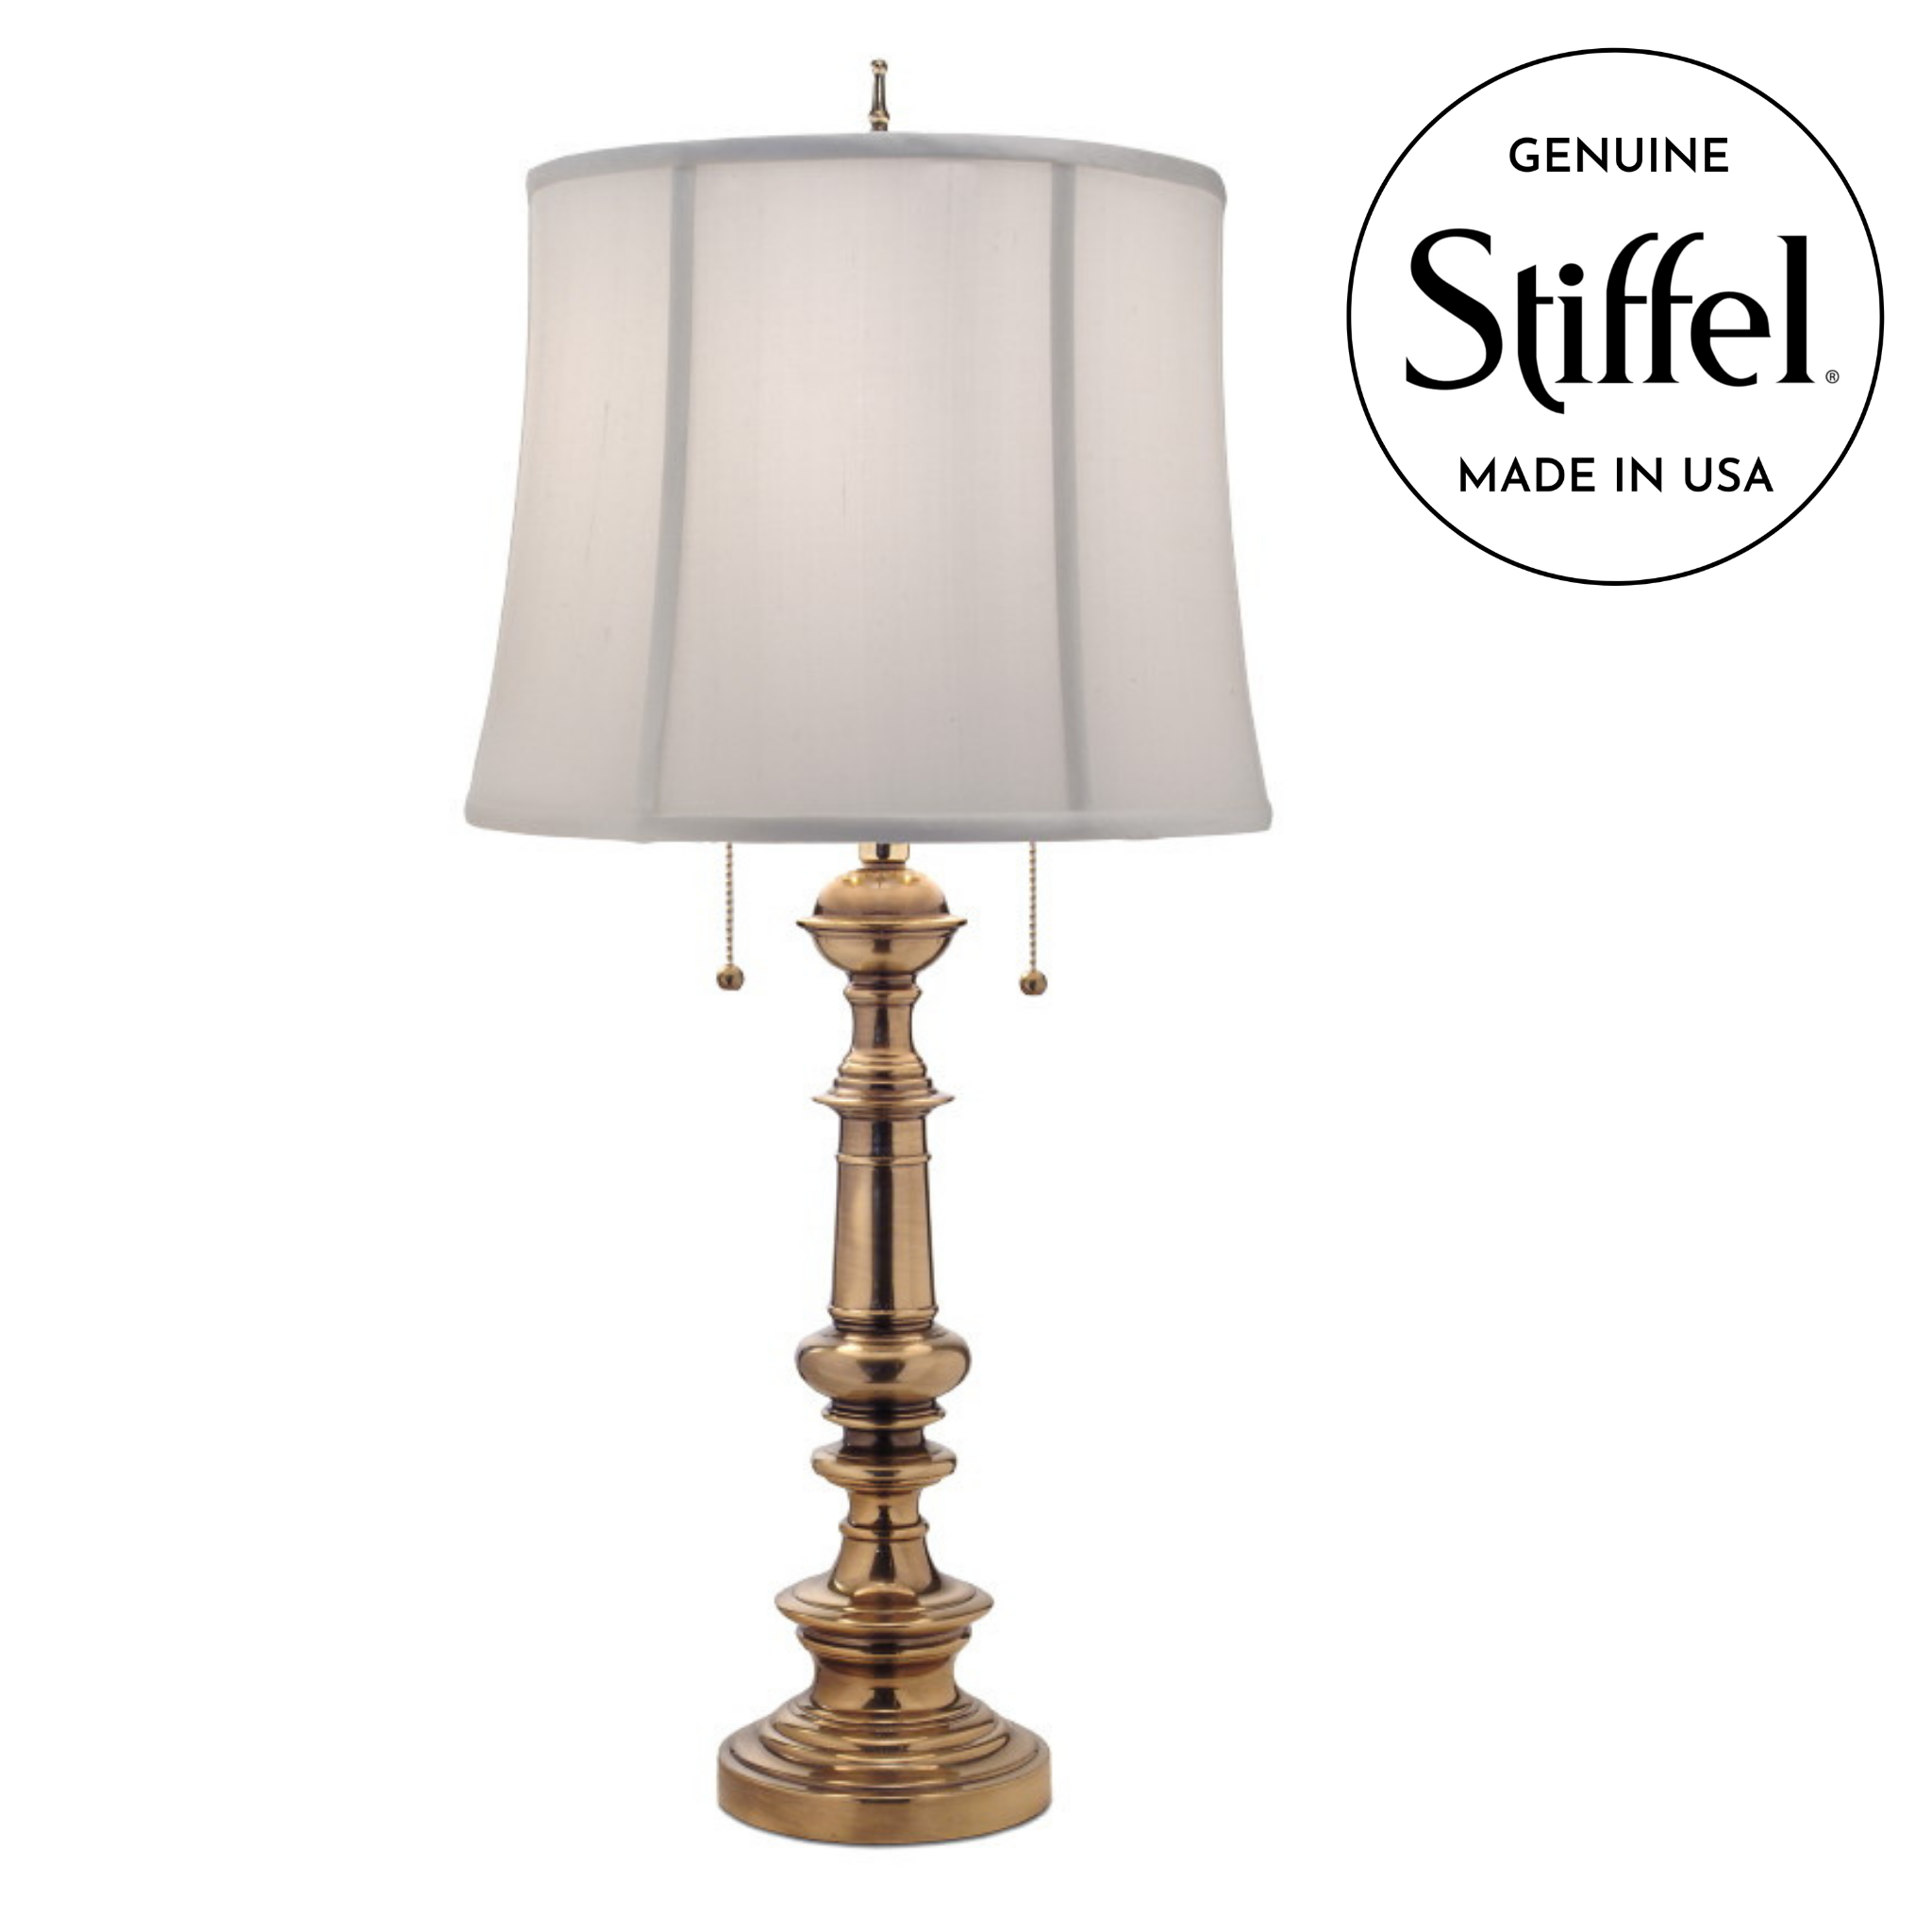 Stiffel Decorative Table Lamp in Burnished Brass with Double Pull Chain